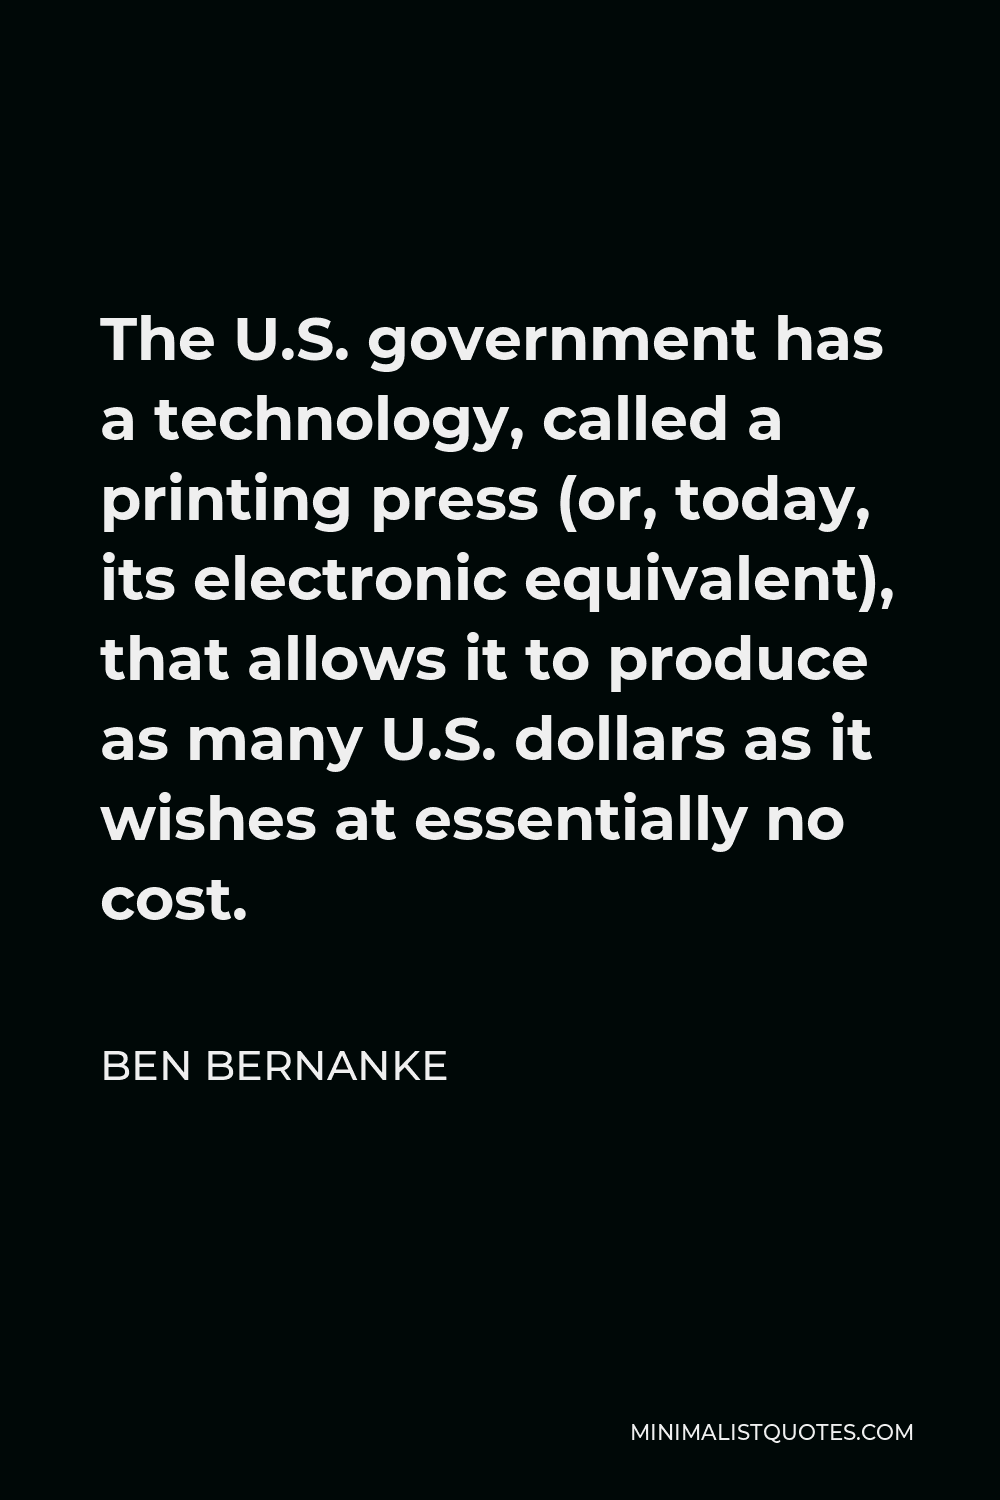 Ben Bernanke Quote - The U.S. government has a technology, called a printing press (or, today, its electronic equivalent), that allows it to produce as many U.S. dollars as it wishes at essentially no cost.